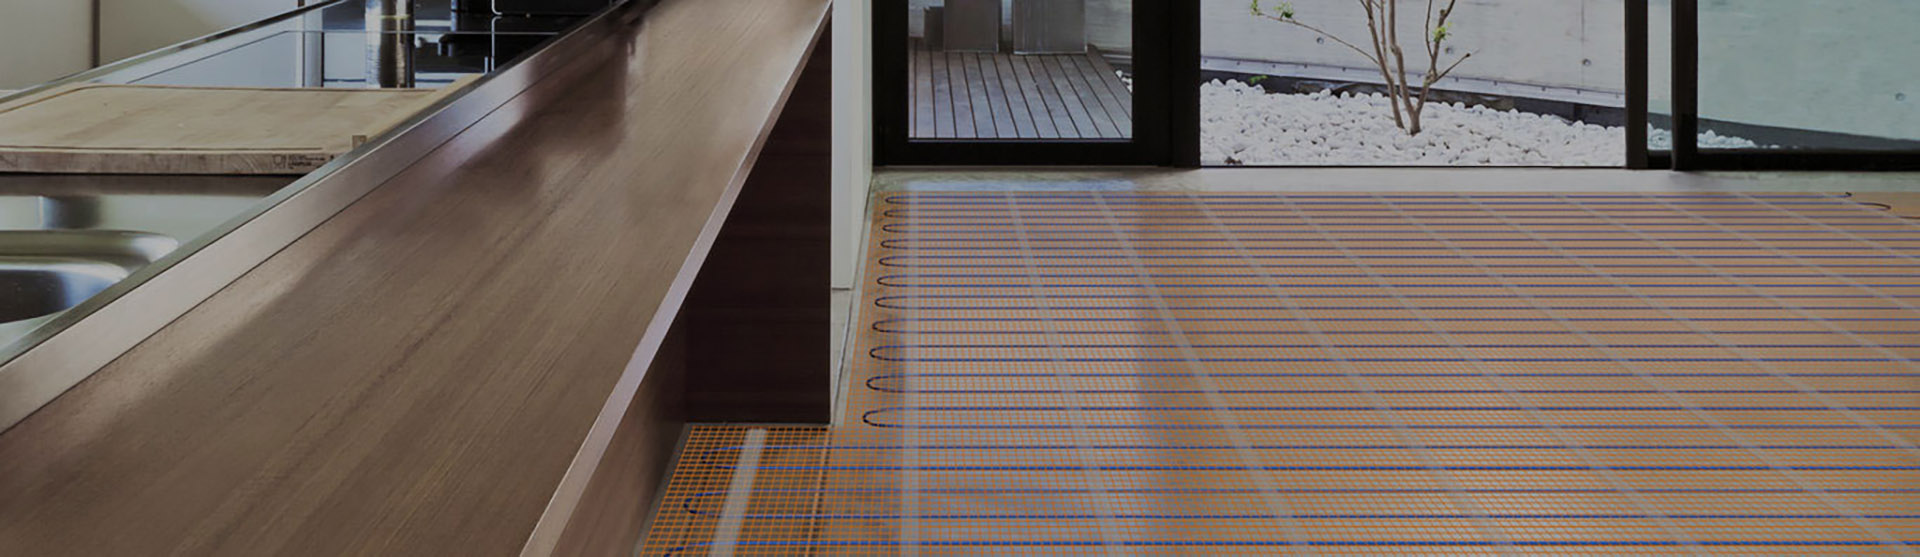 ComfortTile floor heating systems banner